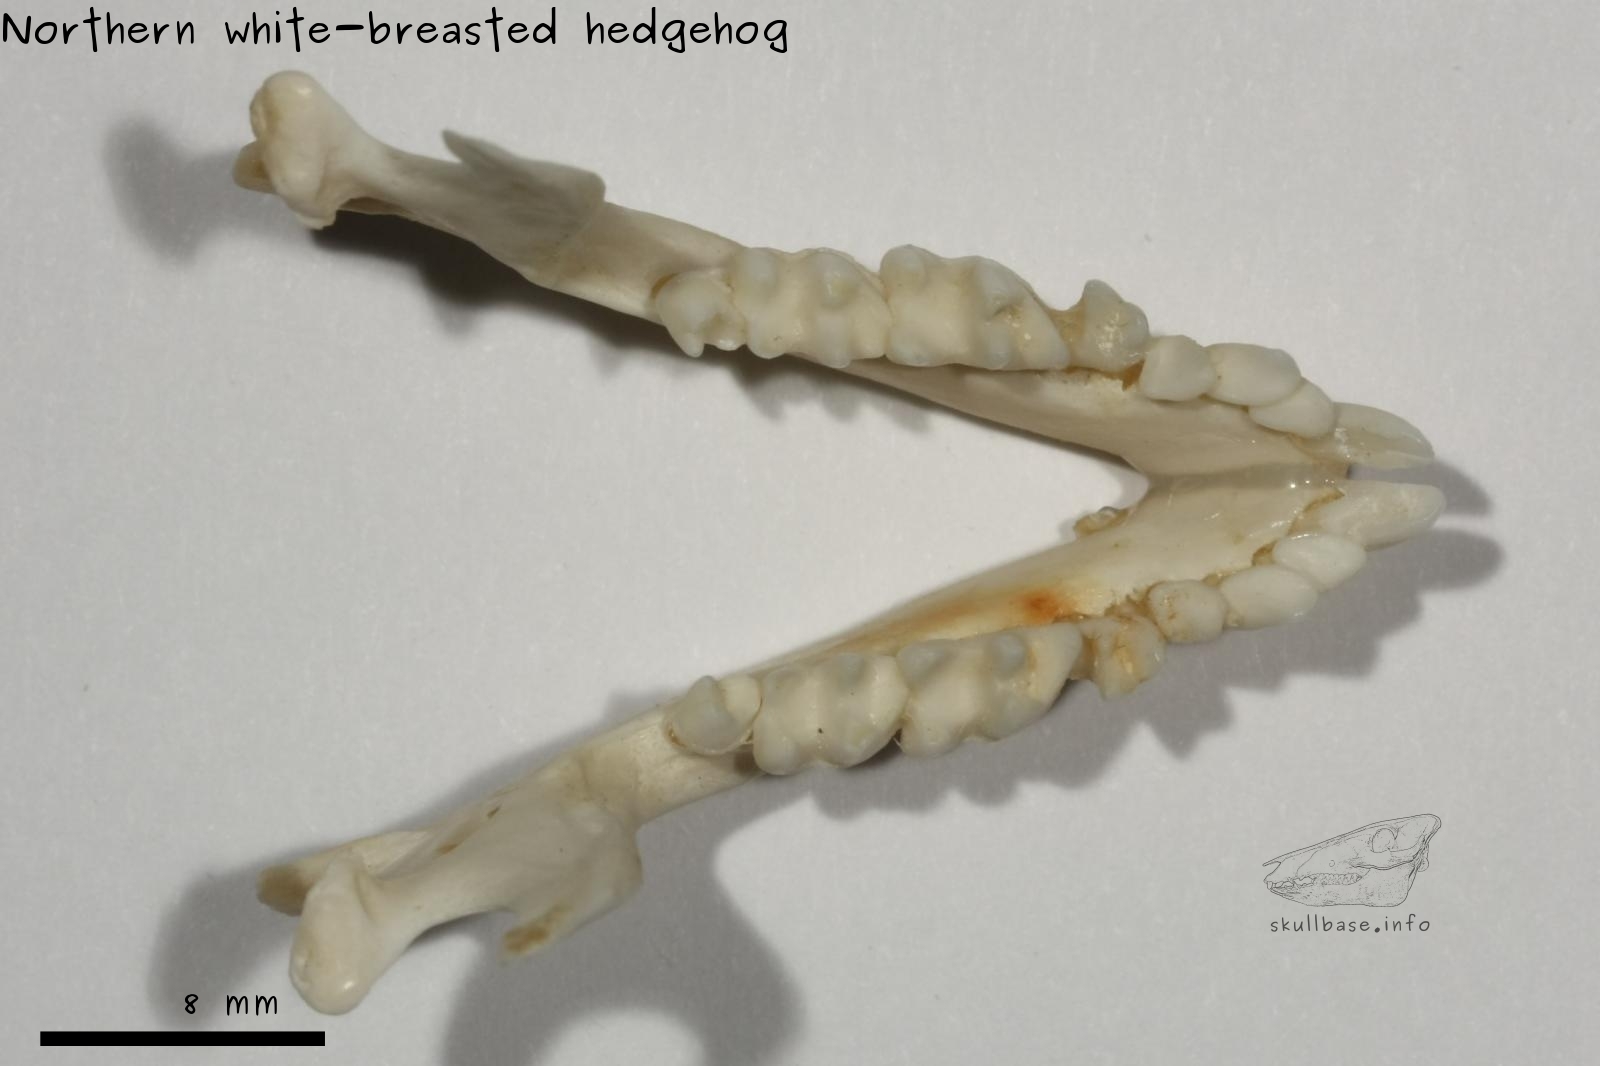 Northern white-breasted hedgehog (Erinaceus roumanicus) jaw